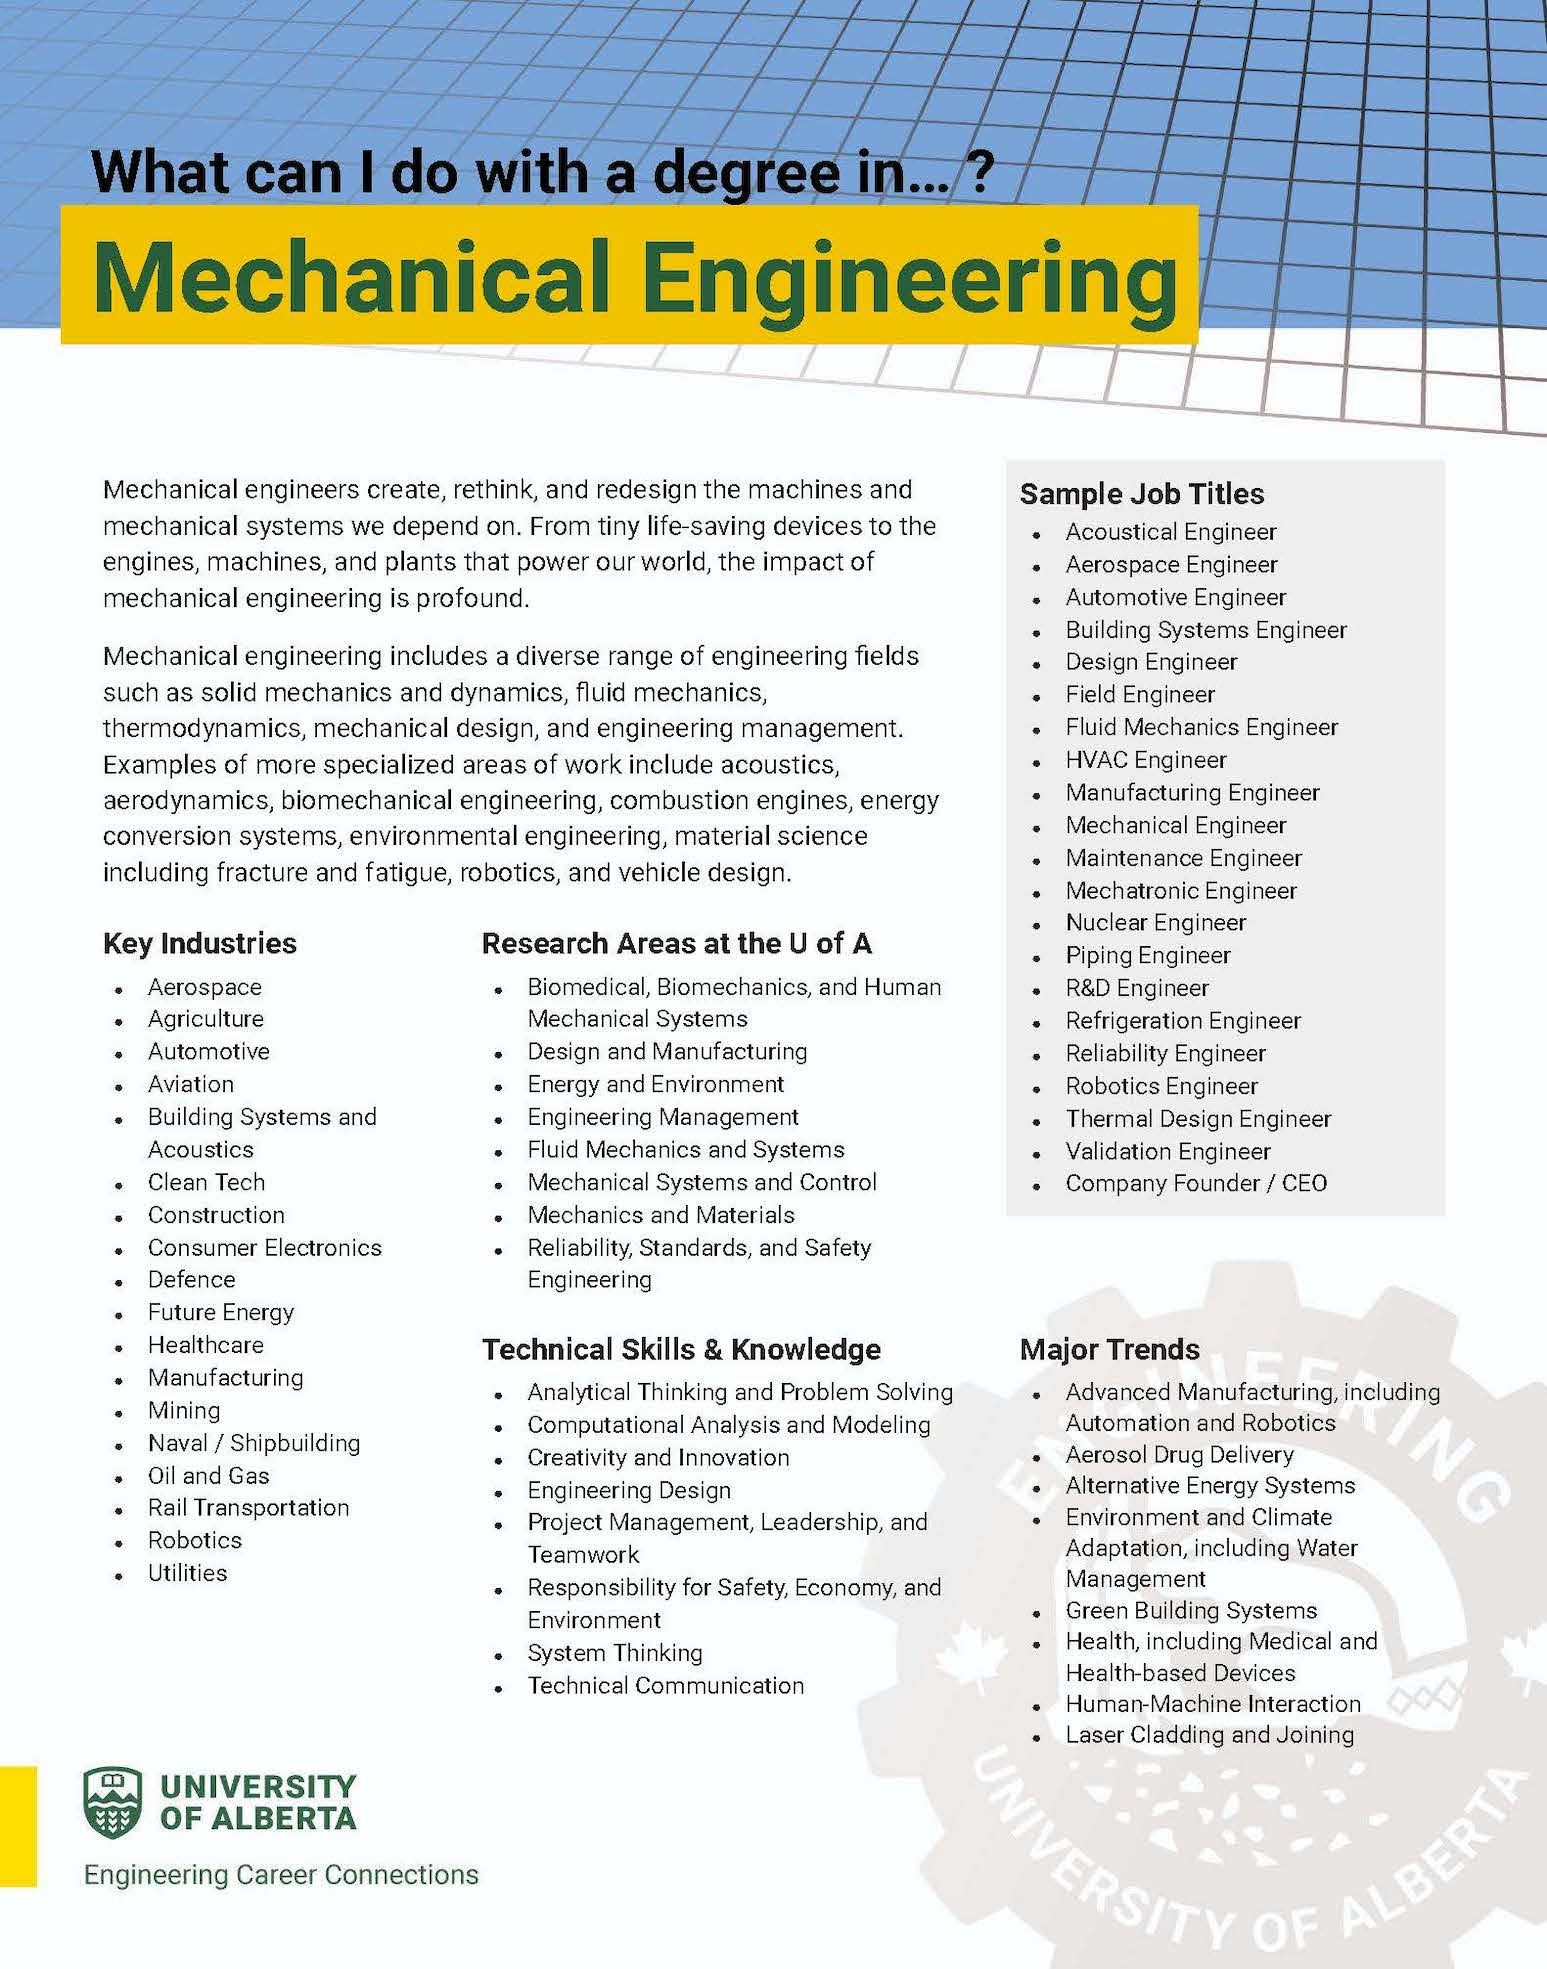 Screenshot of the "What Can I Do With A Degree in Mechanical Engineering?” Handout. The image links to the handout.